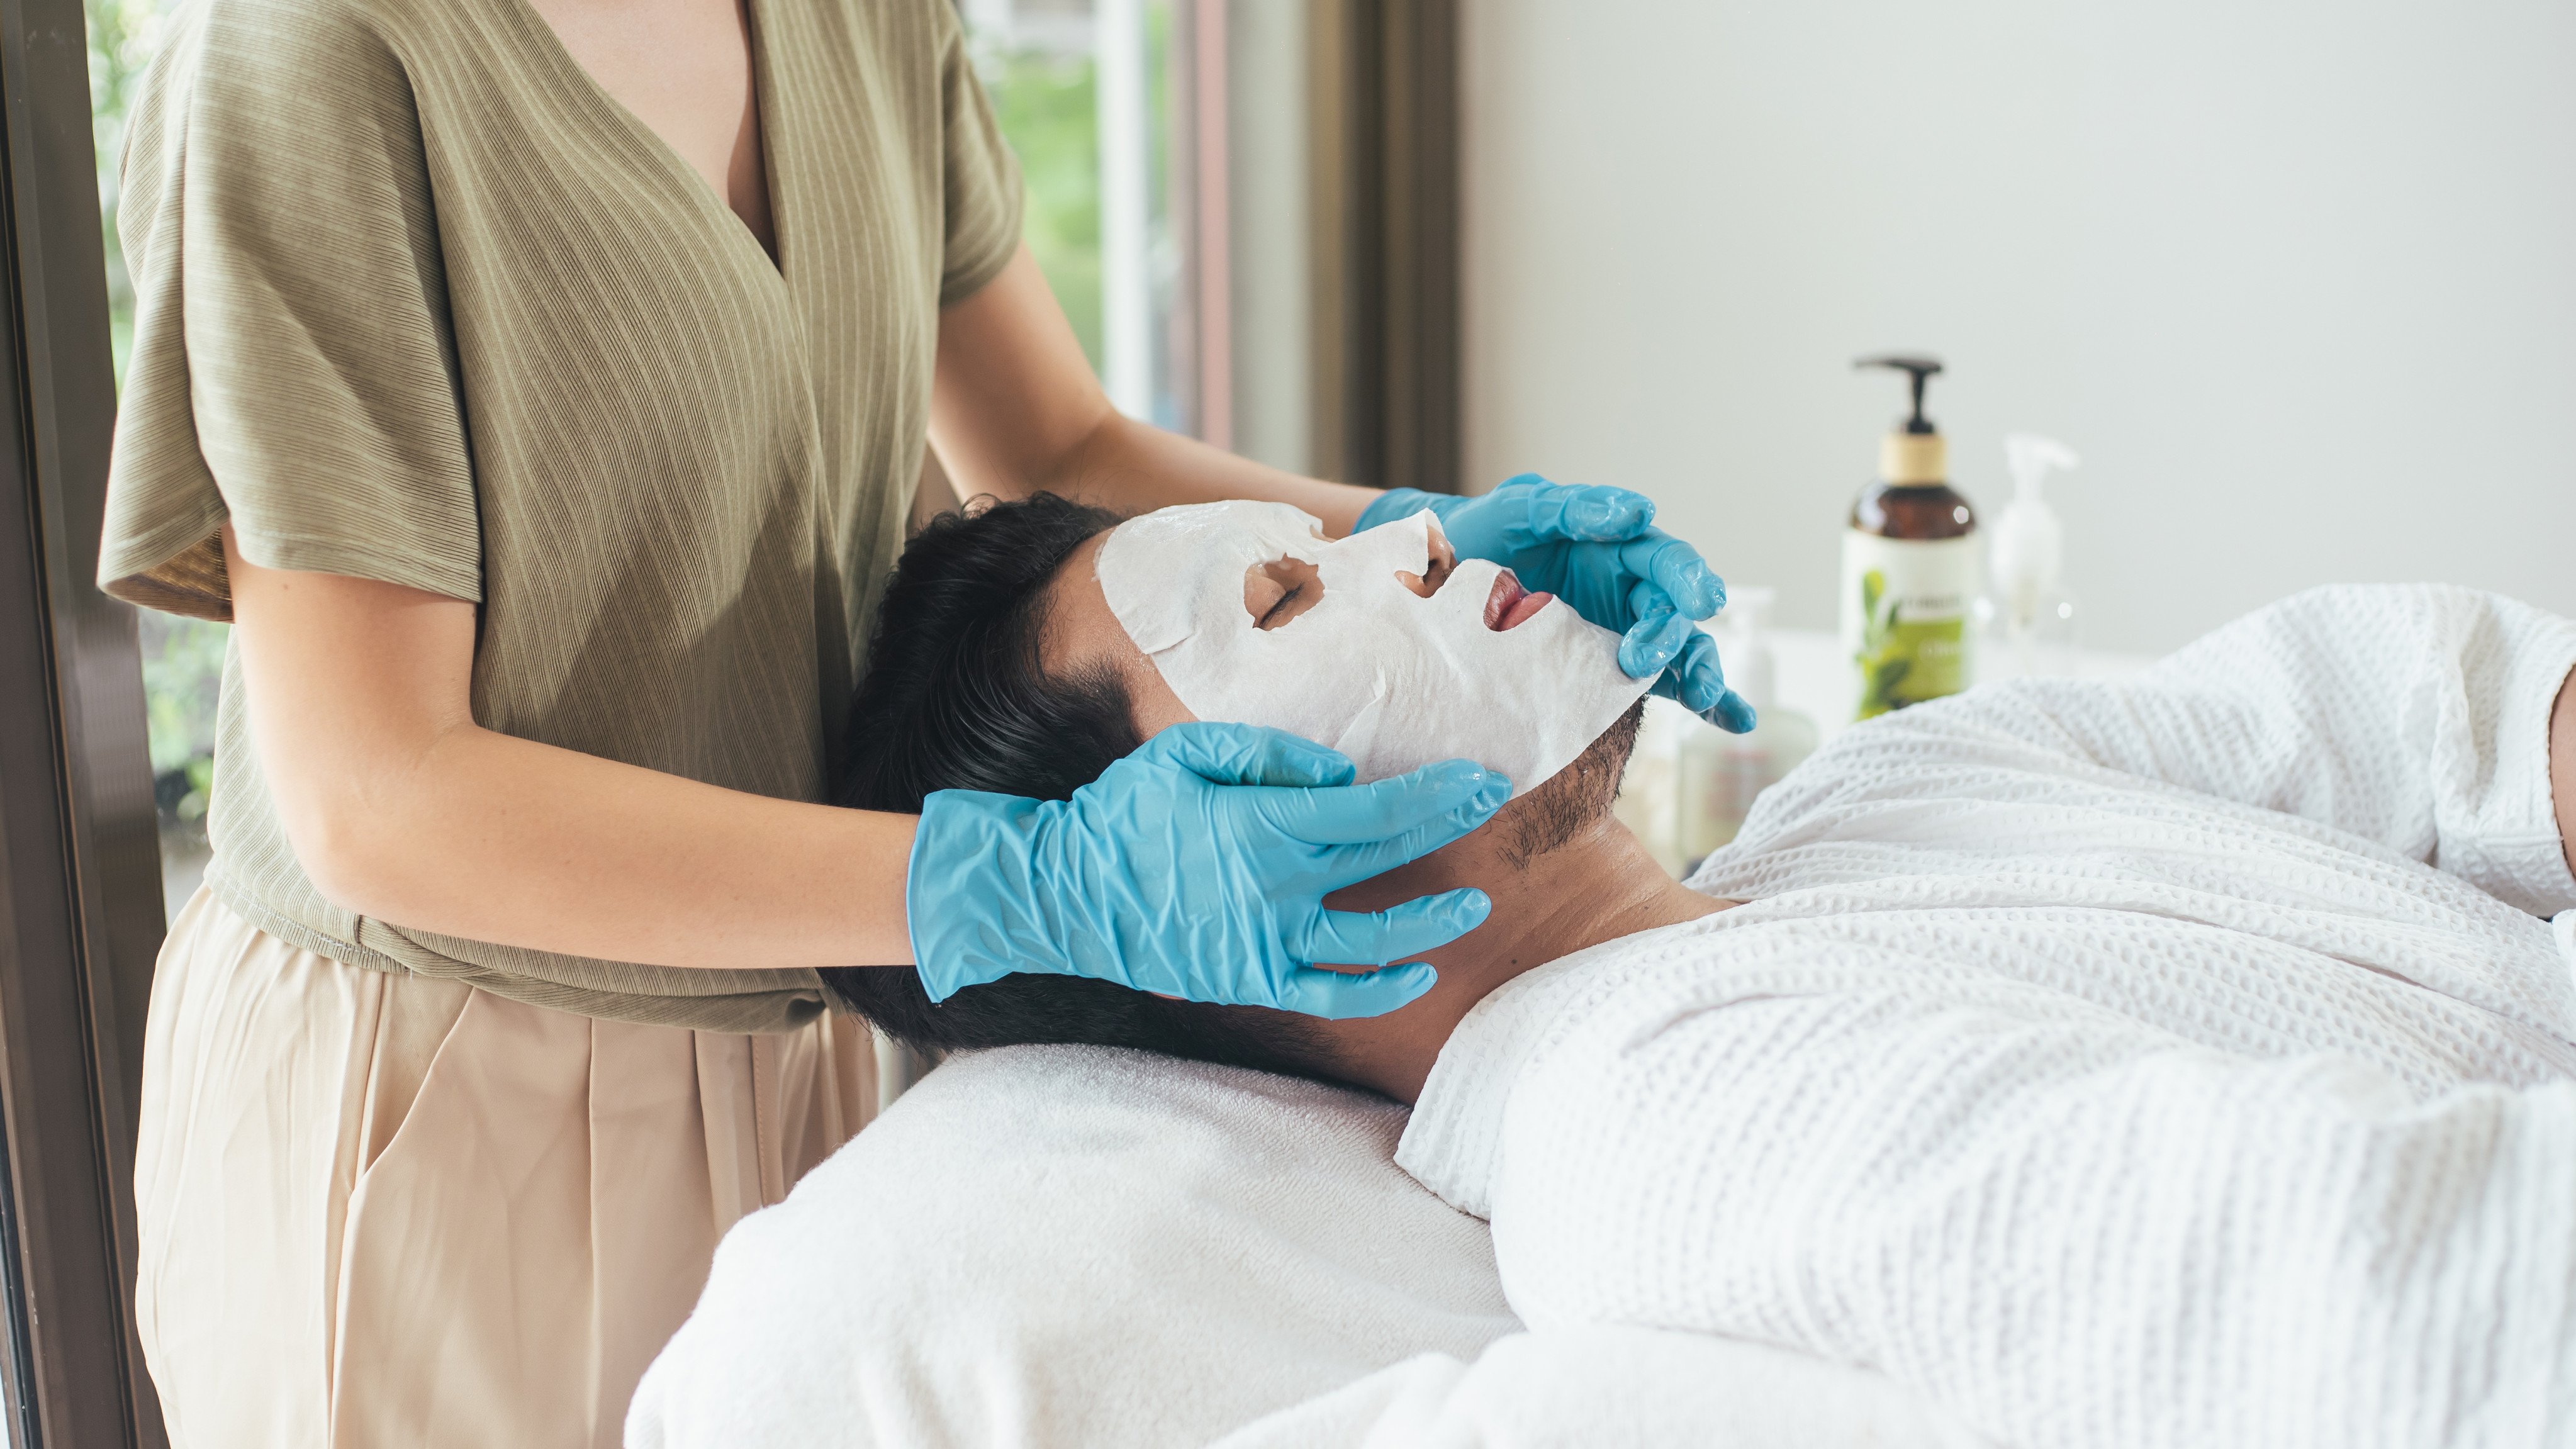 China’s market in particular is poised to drive growth in the skincare and cosmetics category. Photo: Shutterstock Images